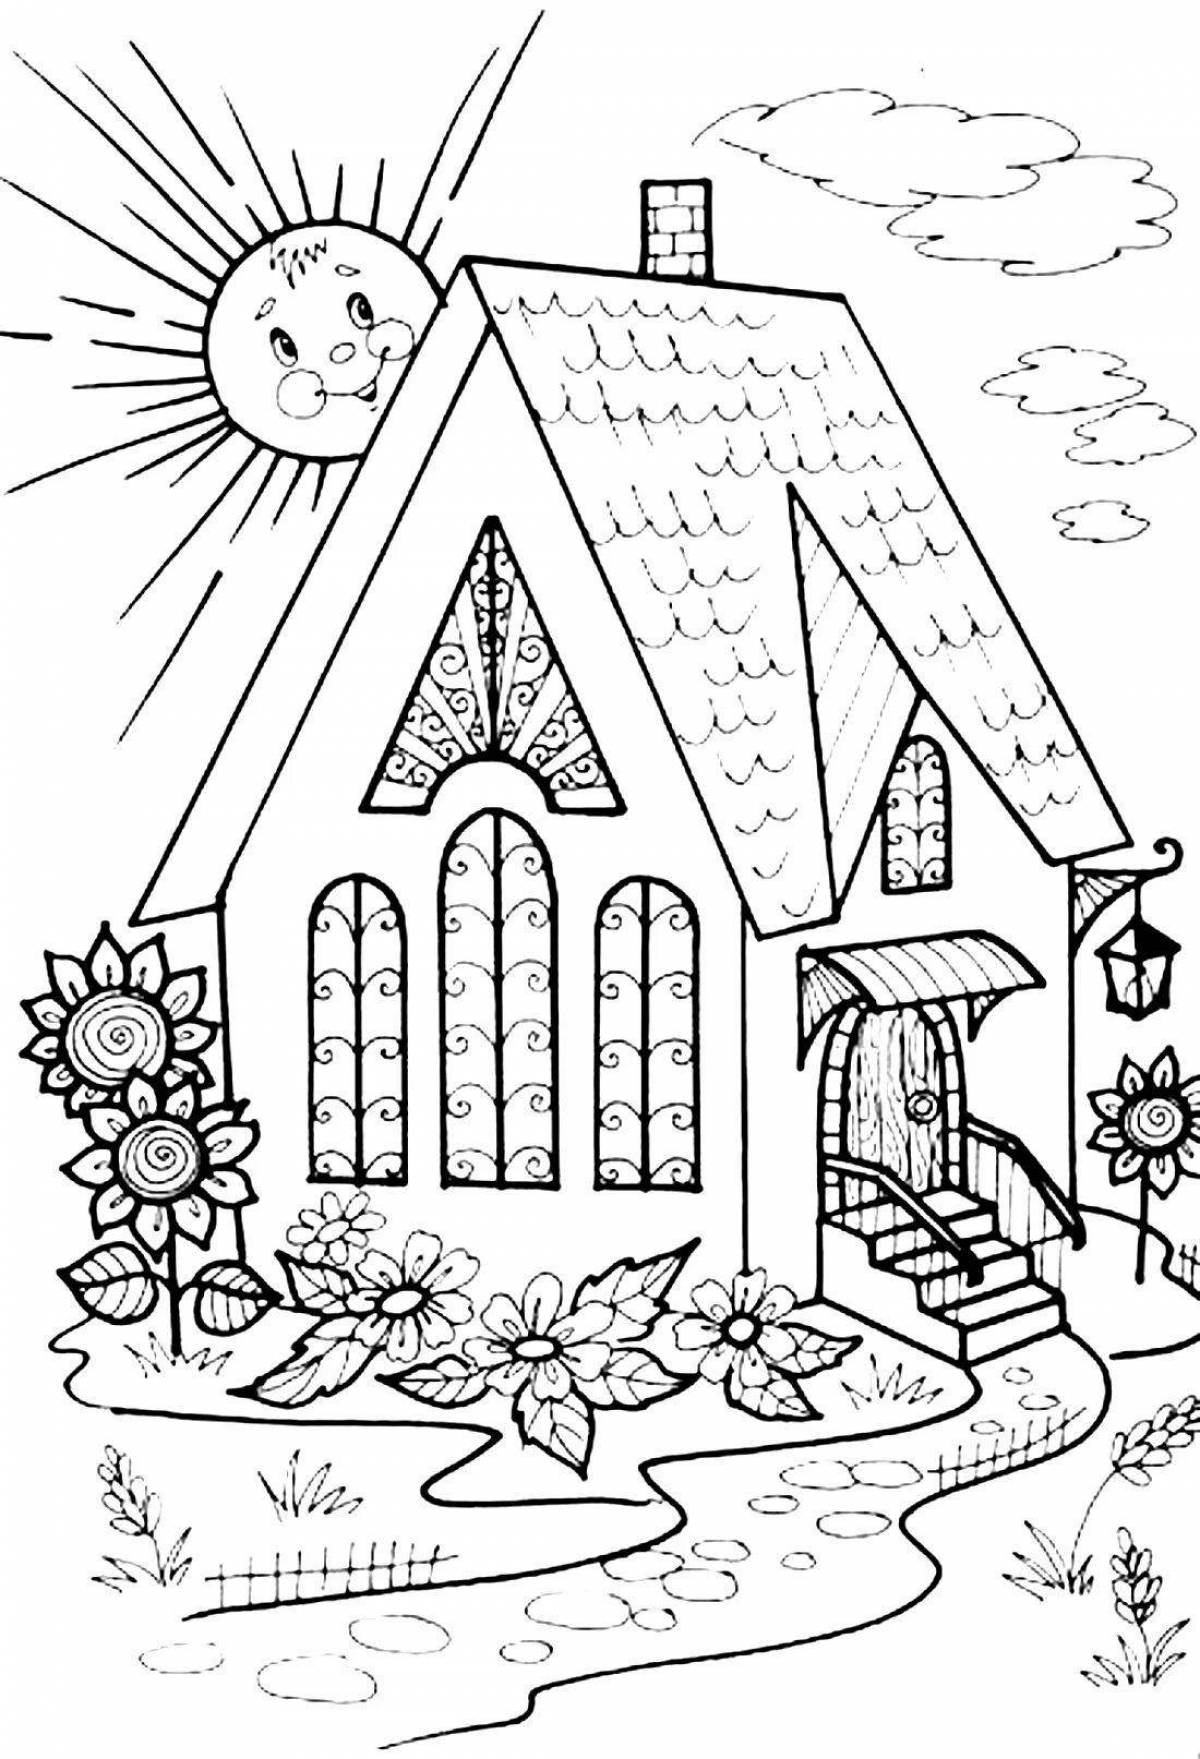 Coloring page nice house